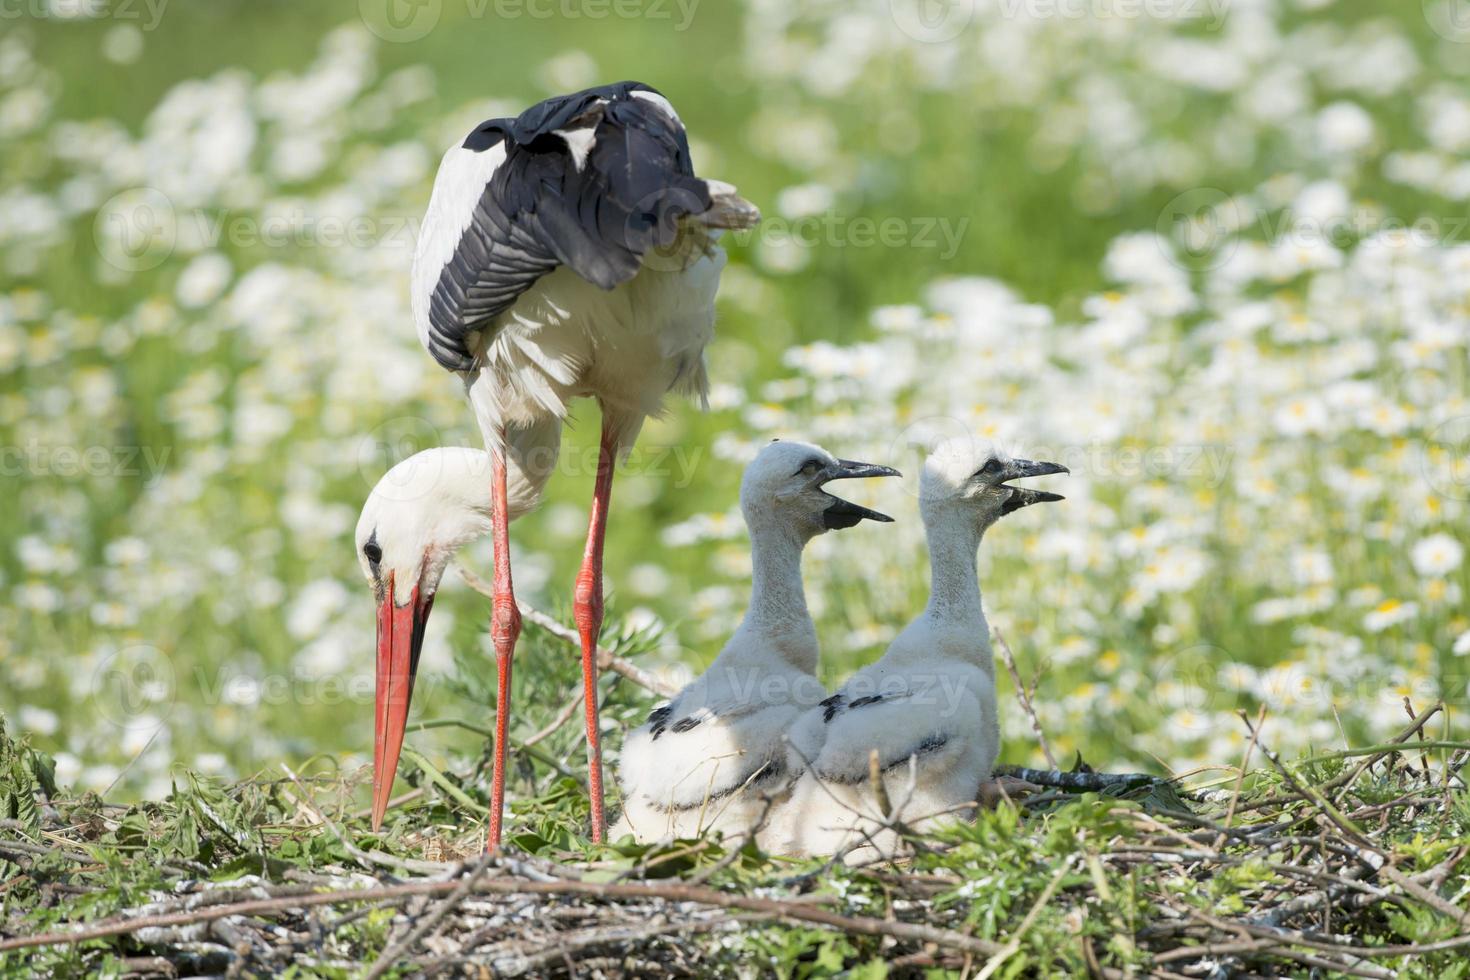 Stork with baby puppy in its nest on the daisy background photo